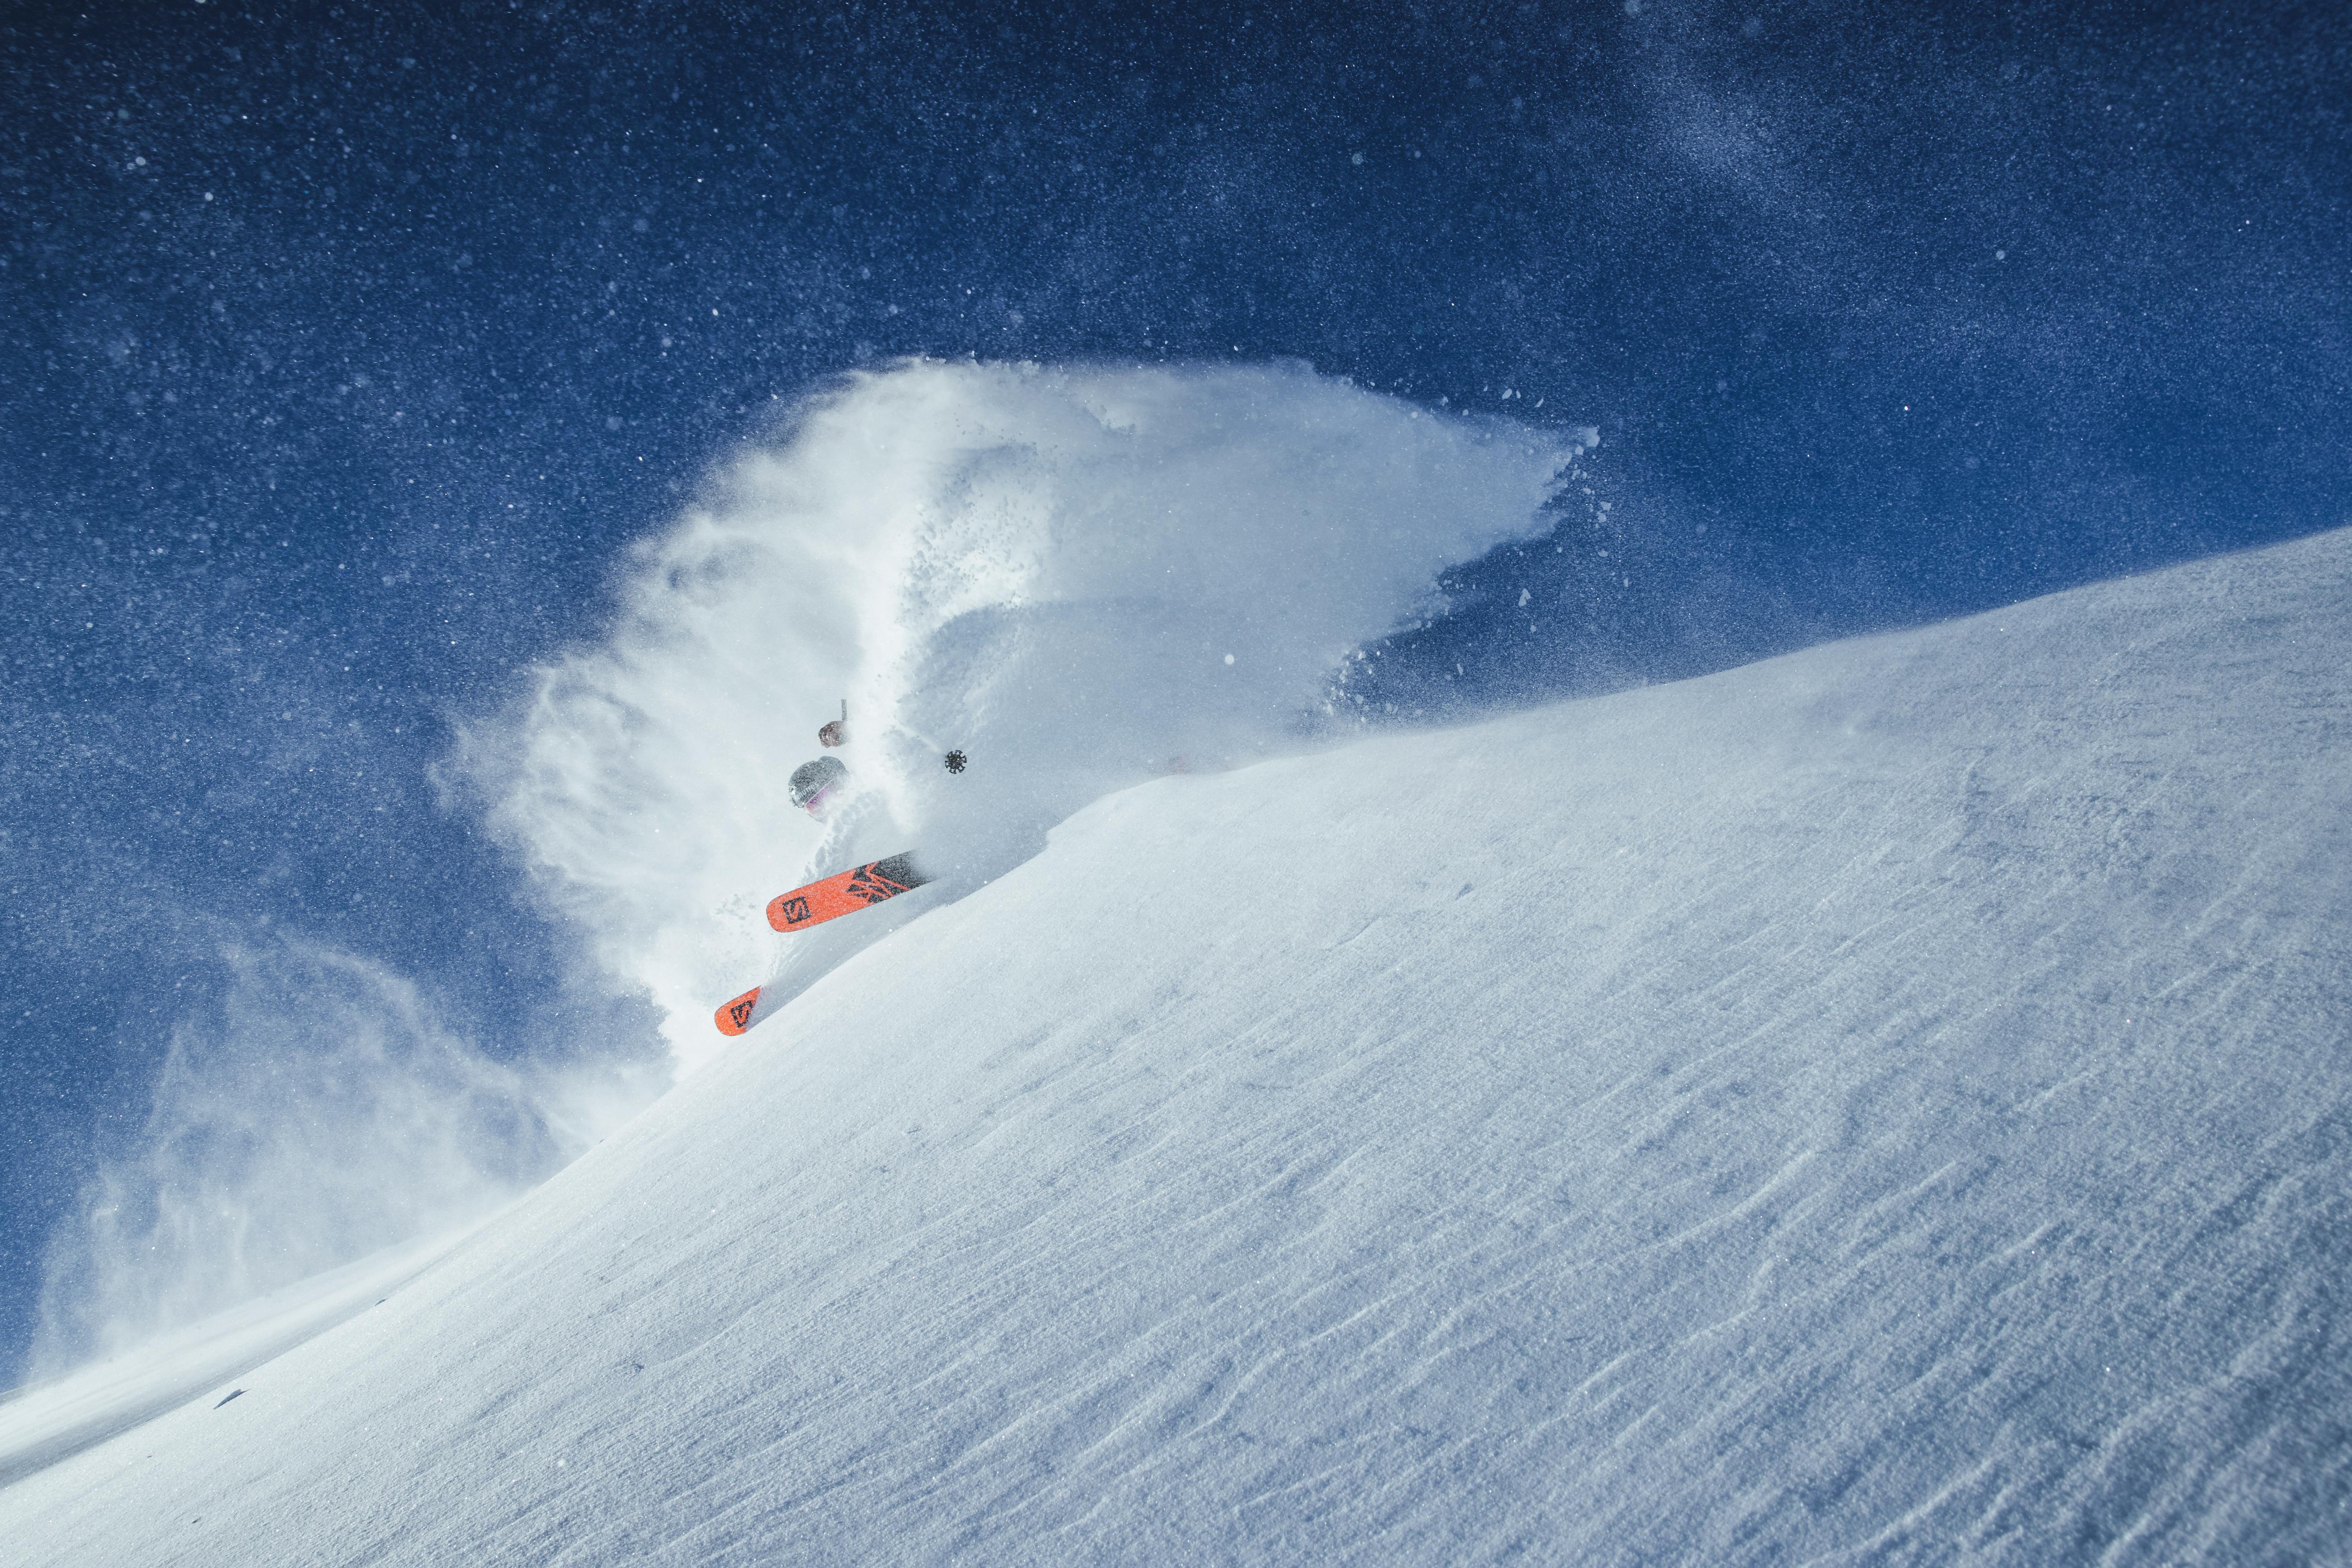 A skier sending out a wave of powder while turning on a steep snowy slope